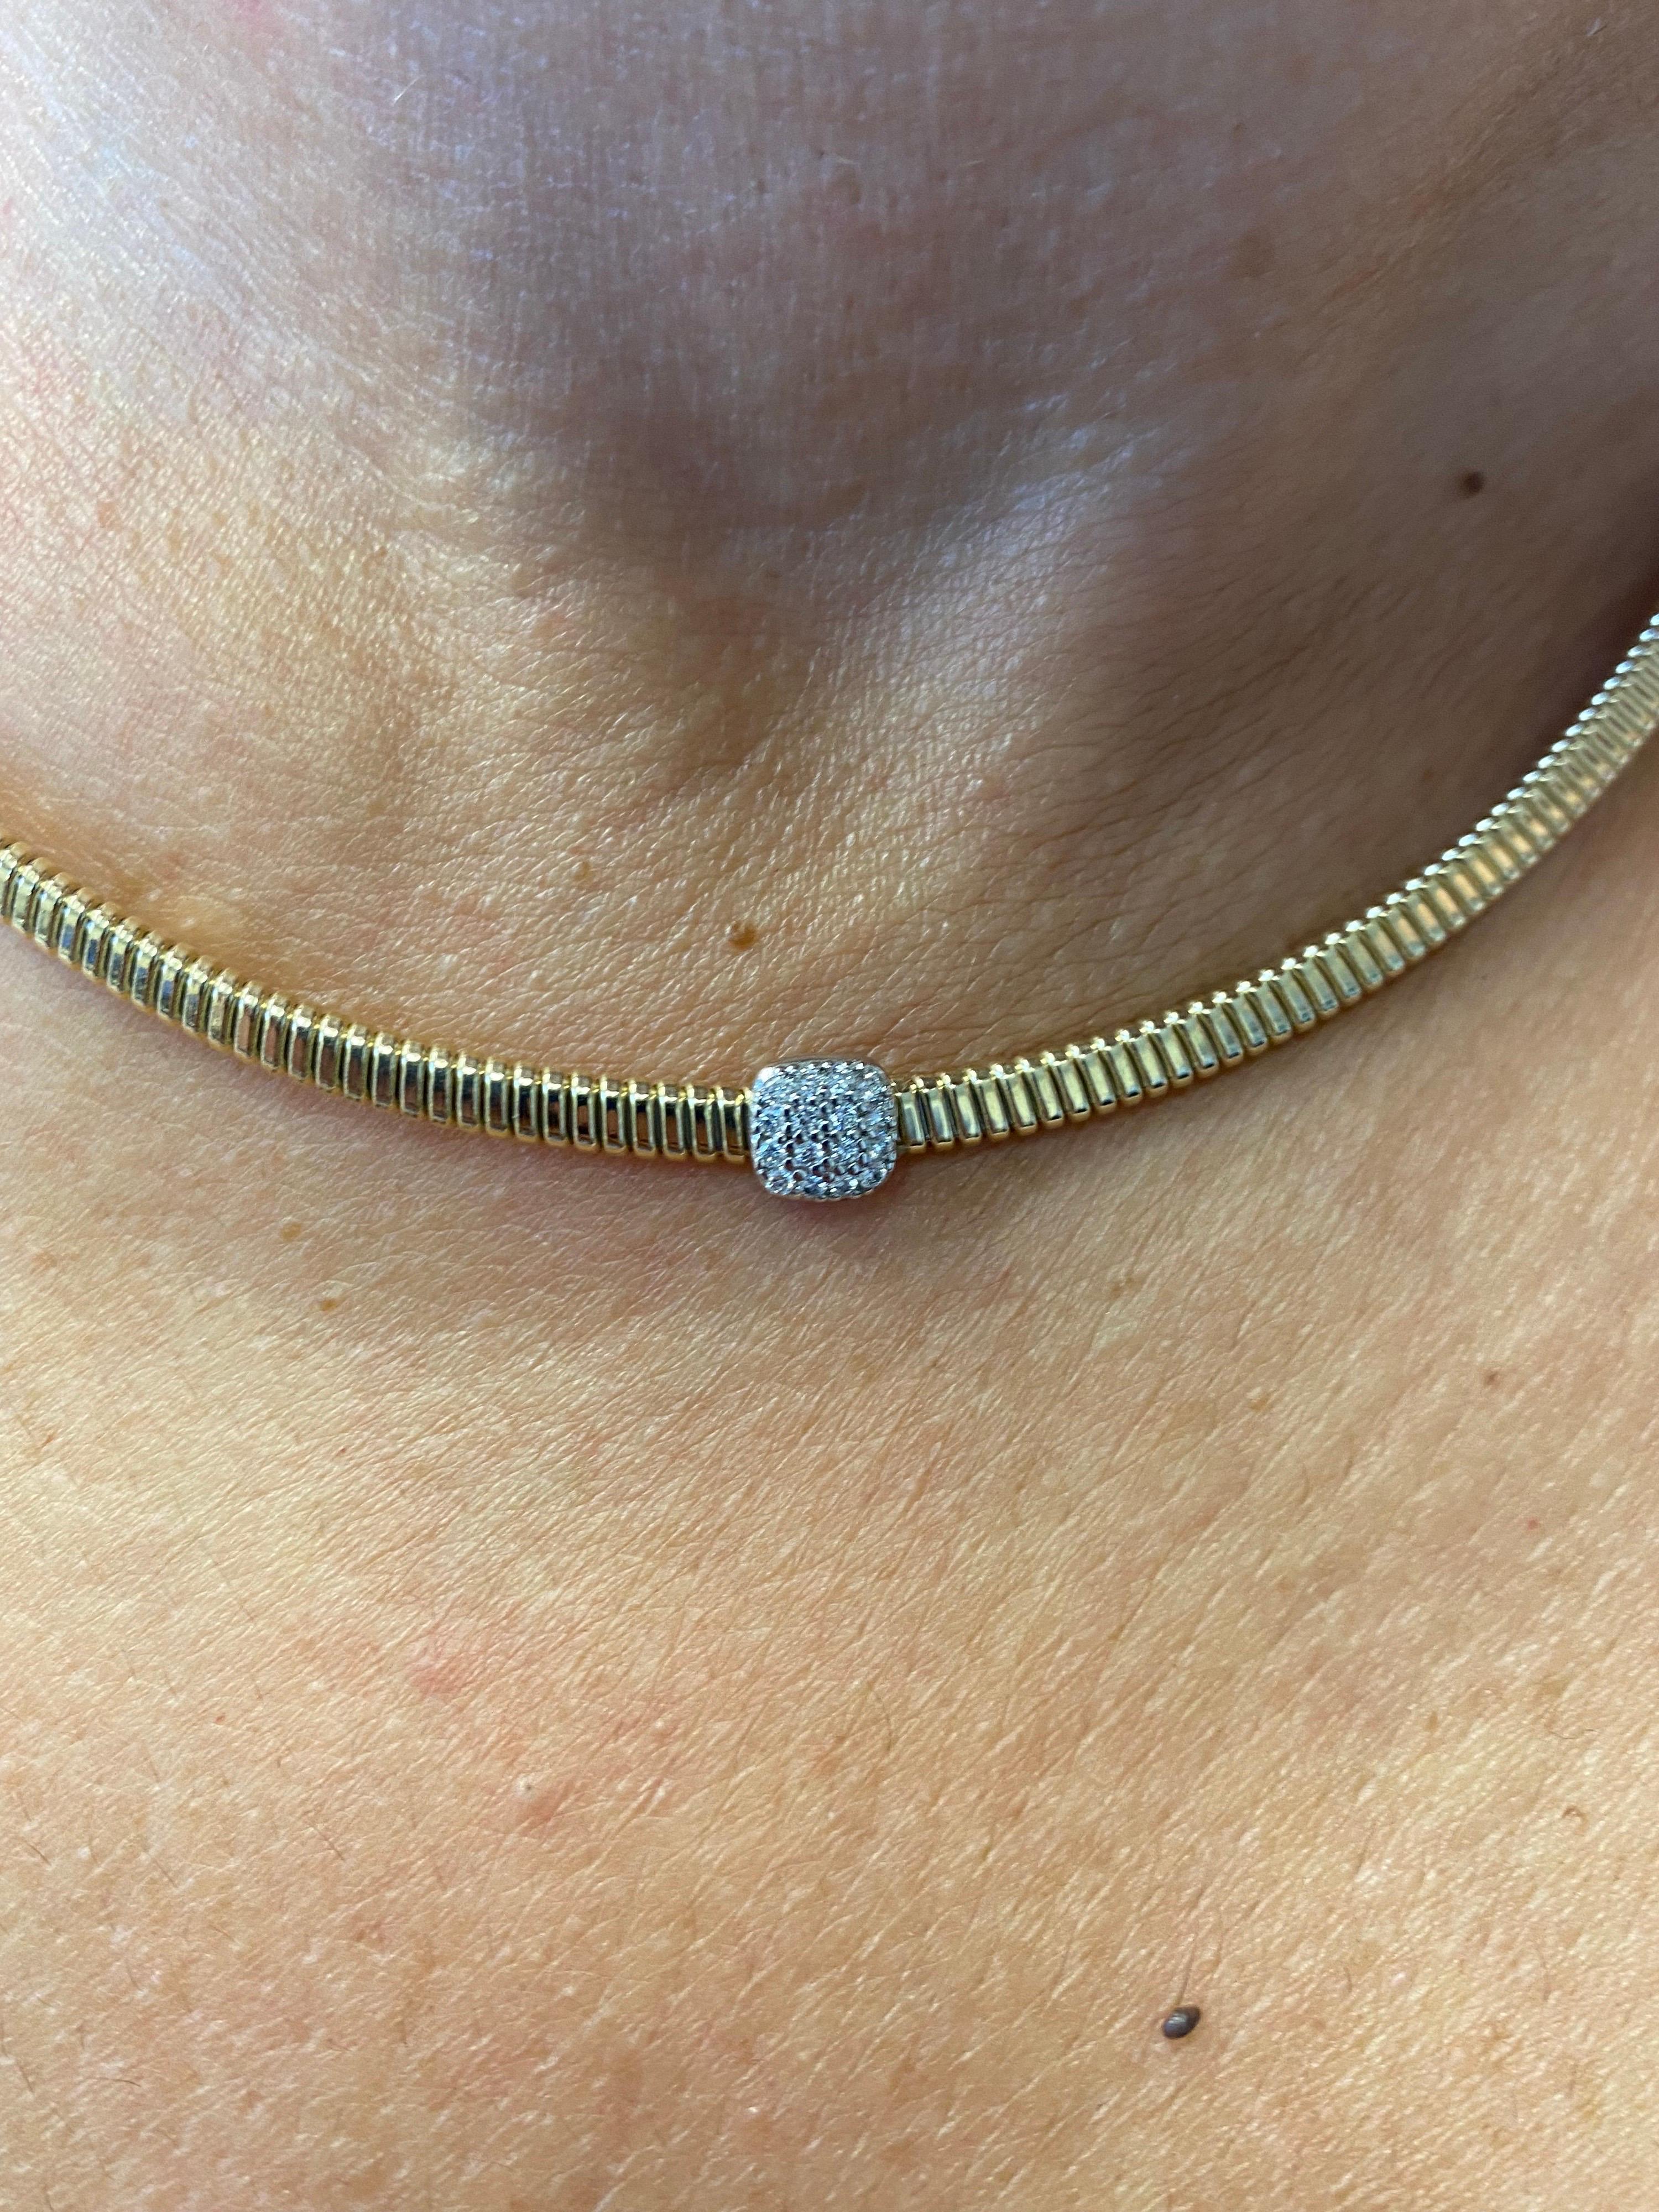 Diamond set in a Pave' in a Tubogas yellow gold necklace. The necklace is 14K and the carat weight is 0.42 carats. The color of the stones are F-G, the clarity is SI. The necklace is 16 inches long. 